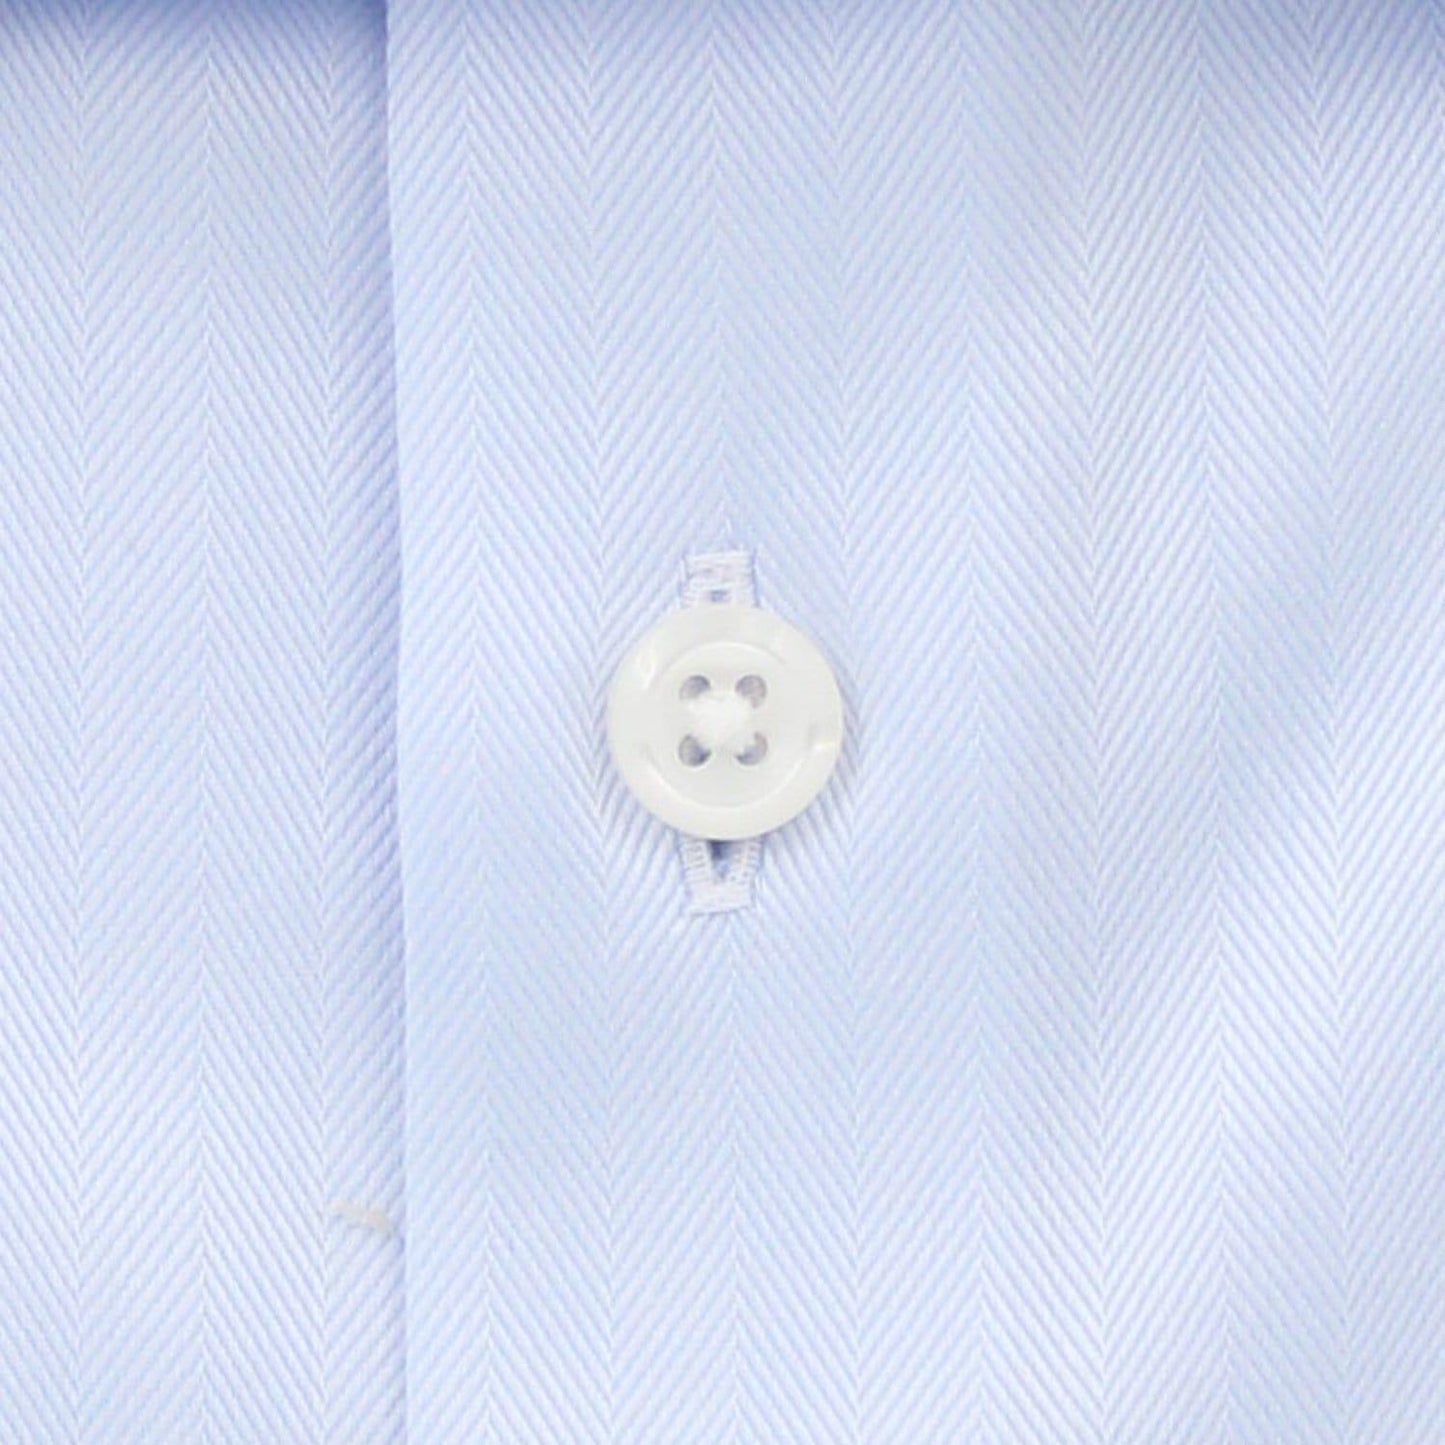 Non-Iron Solid Light Blue Shirt - Just White Shirts